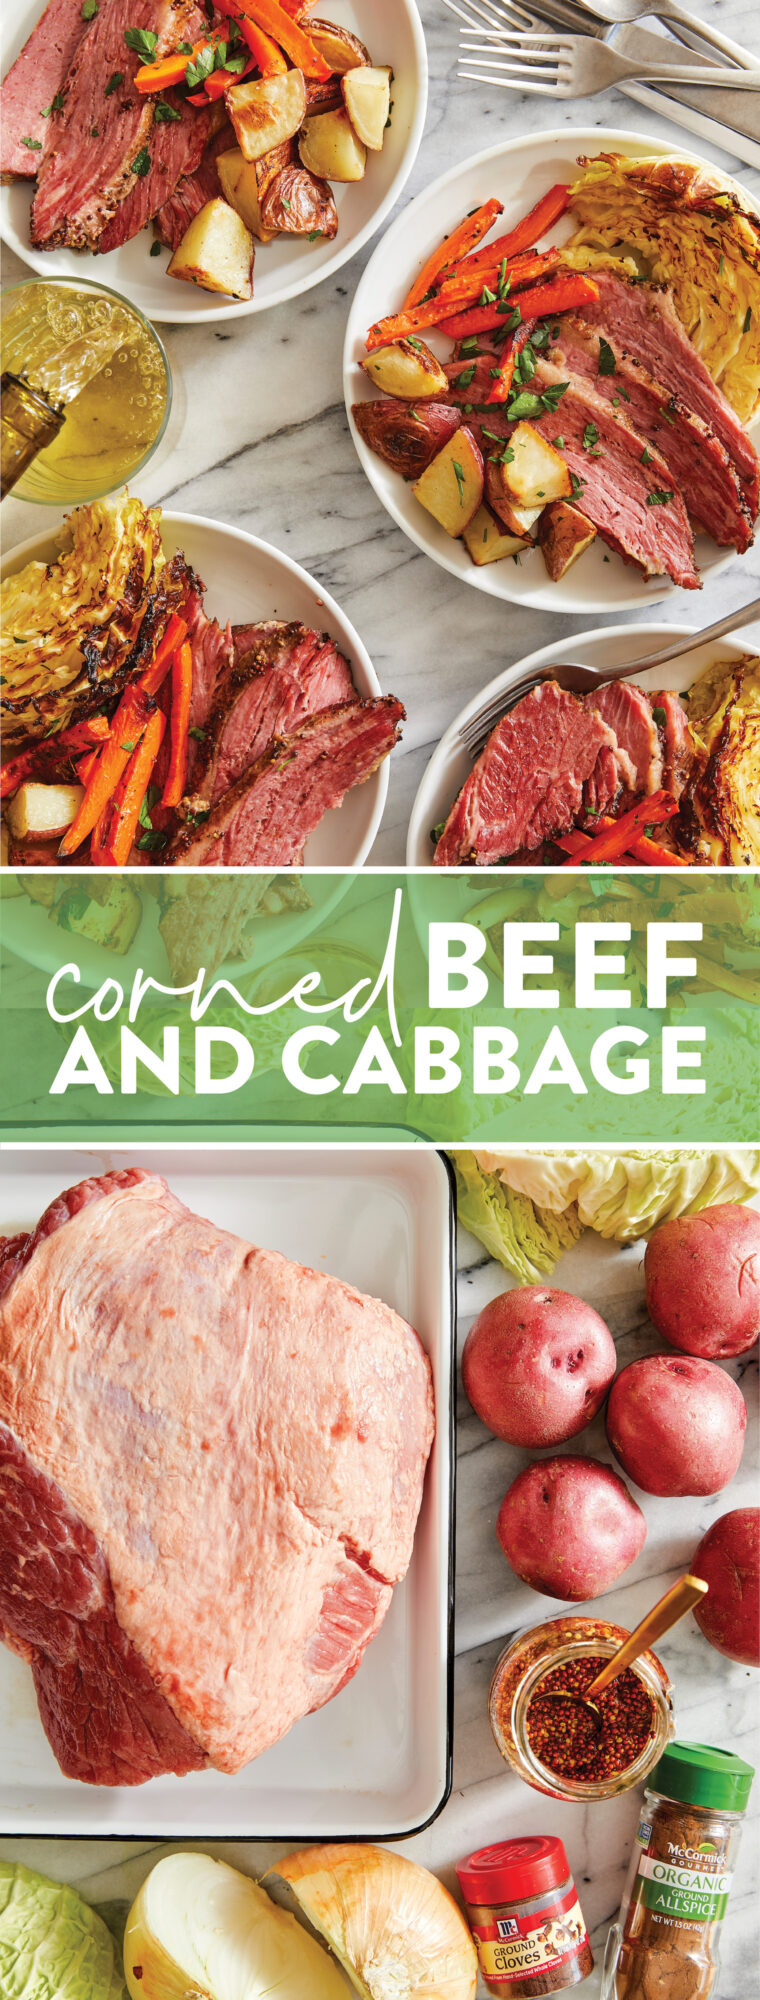 Corned Beef and Cabbage - THE BEST corned beef dinner with cabbage, potatoes and carrots, all roasted to perfection! Best served with mustard.